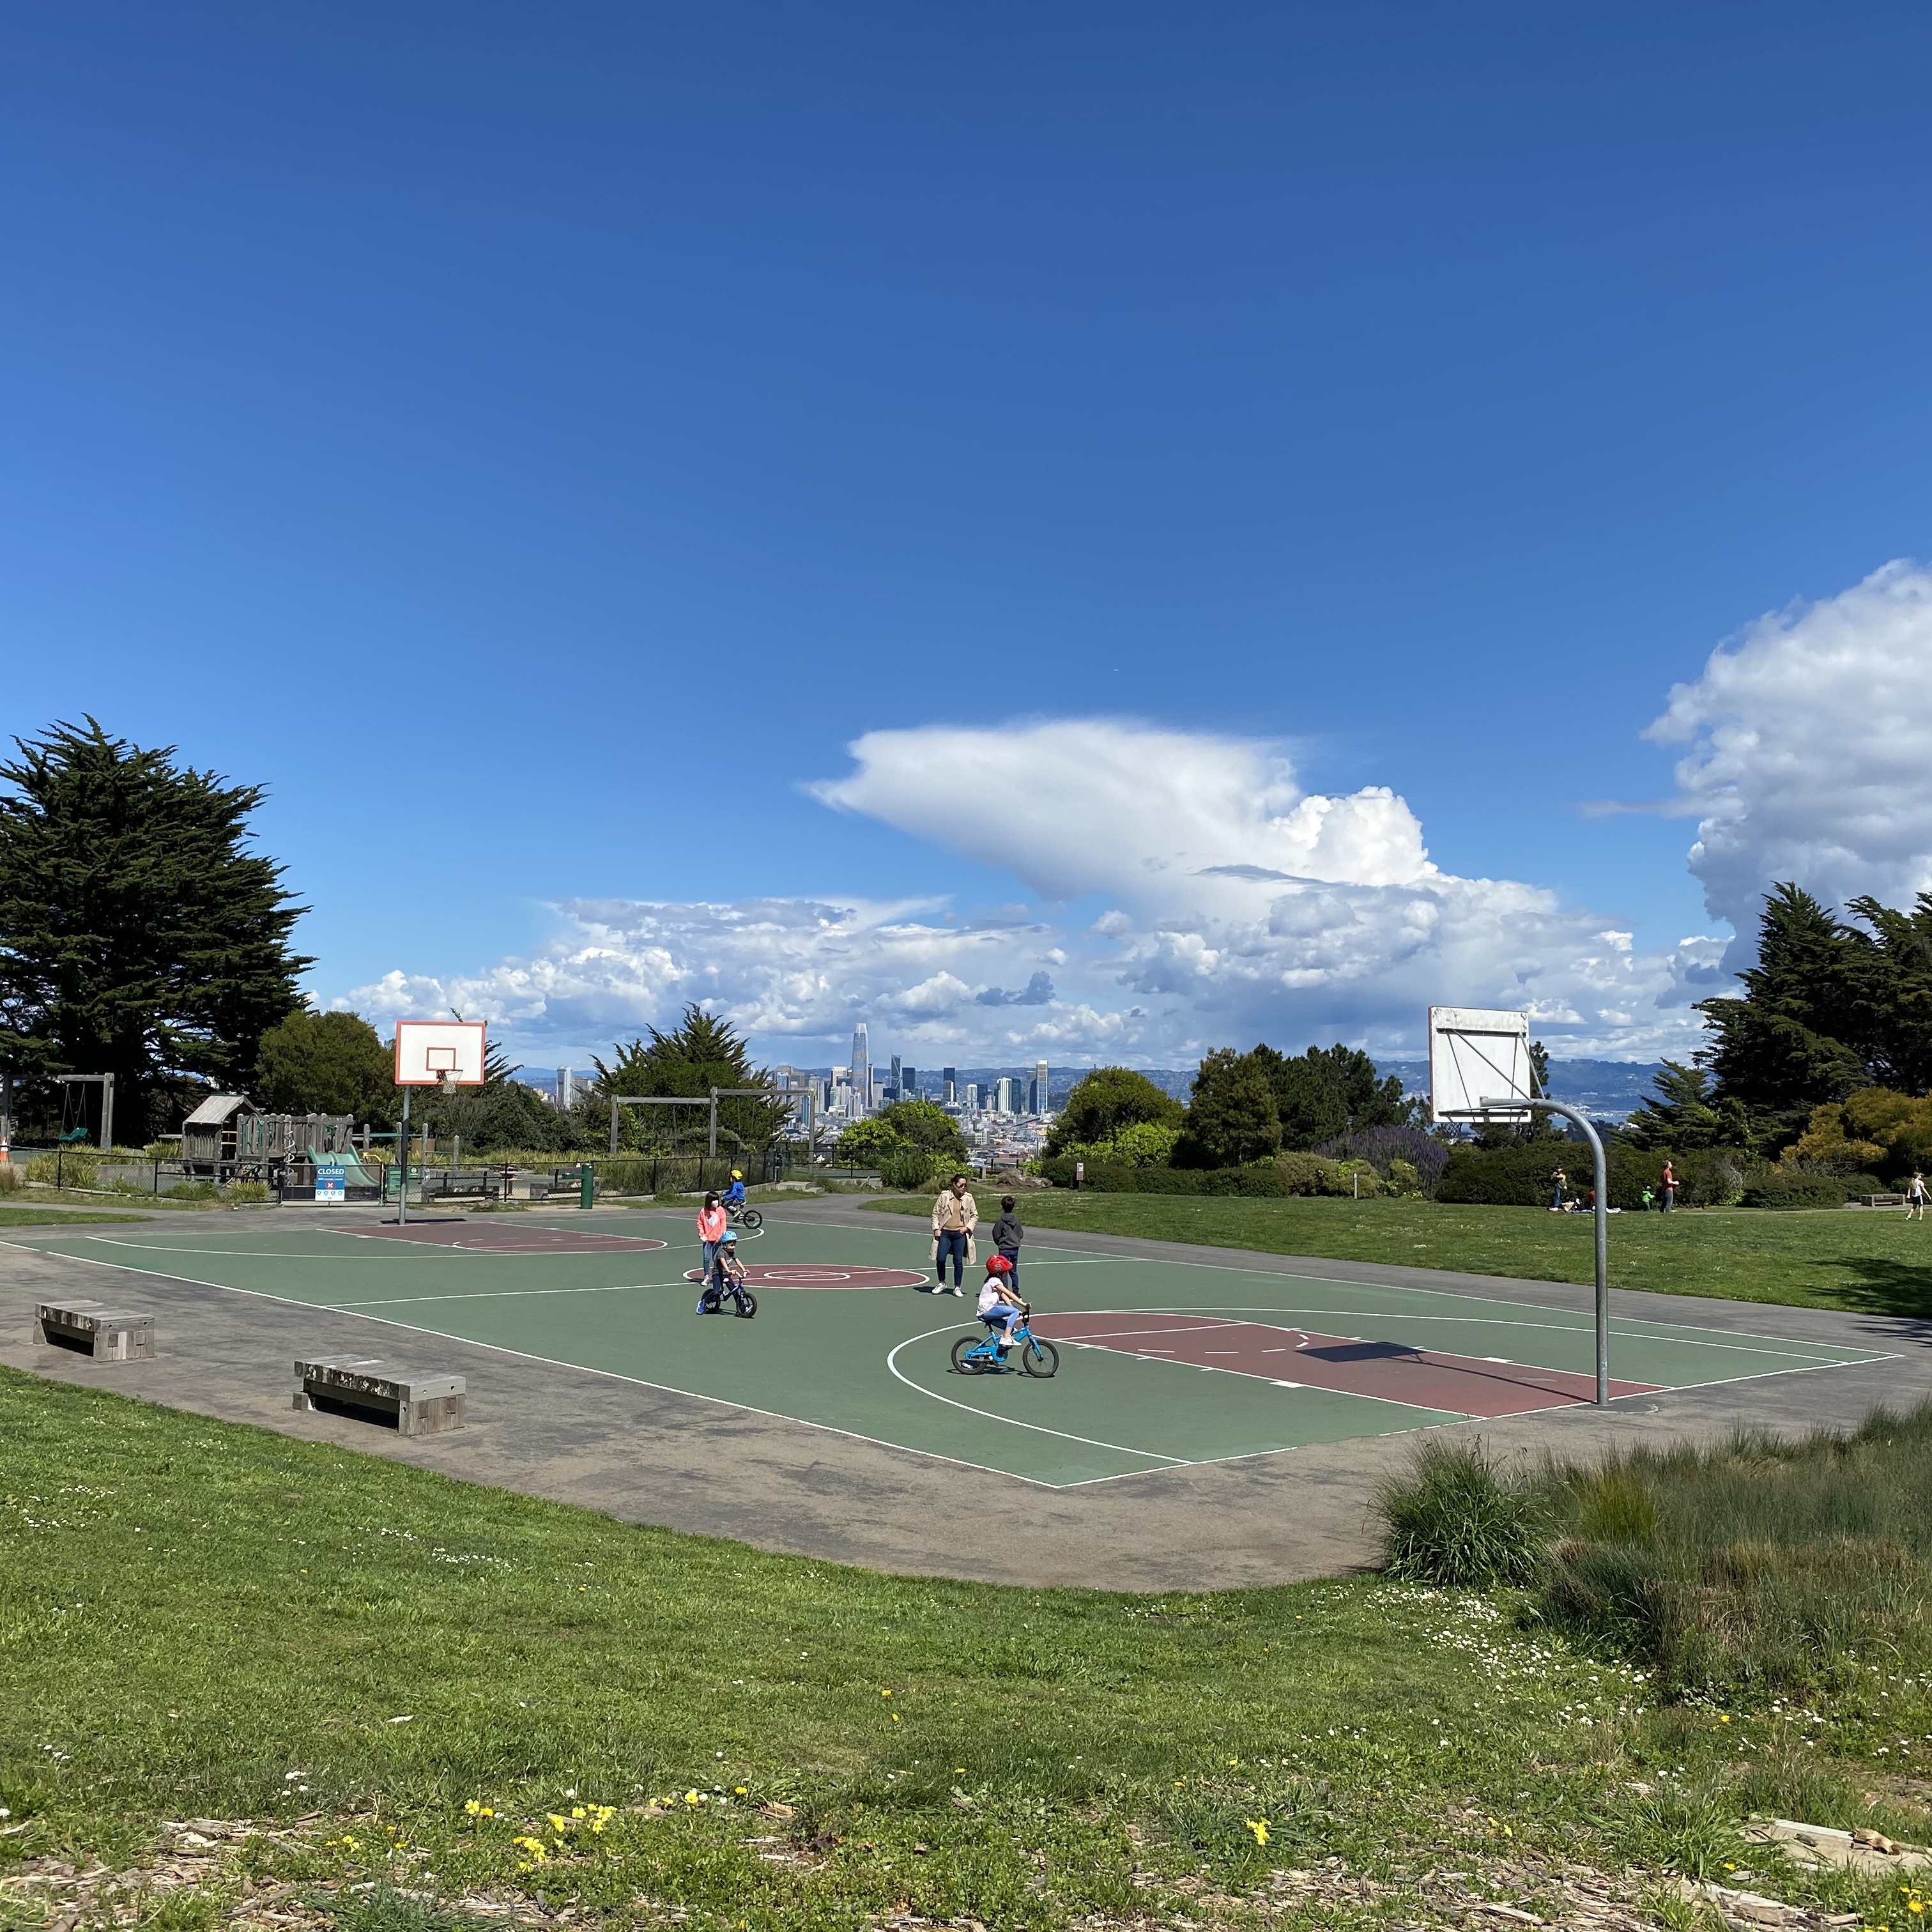 A sunny outdoor basketball court with children riding bicycles on it. The court is surrounded by green grass and benches. In the background, there are tall trees, a playground, and a clear view of the city skyline under a bright blue sky with scattered clouds.